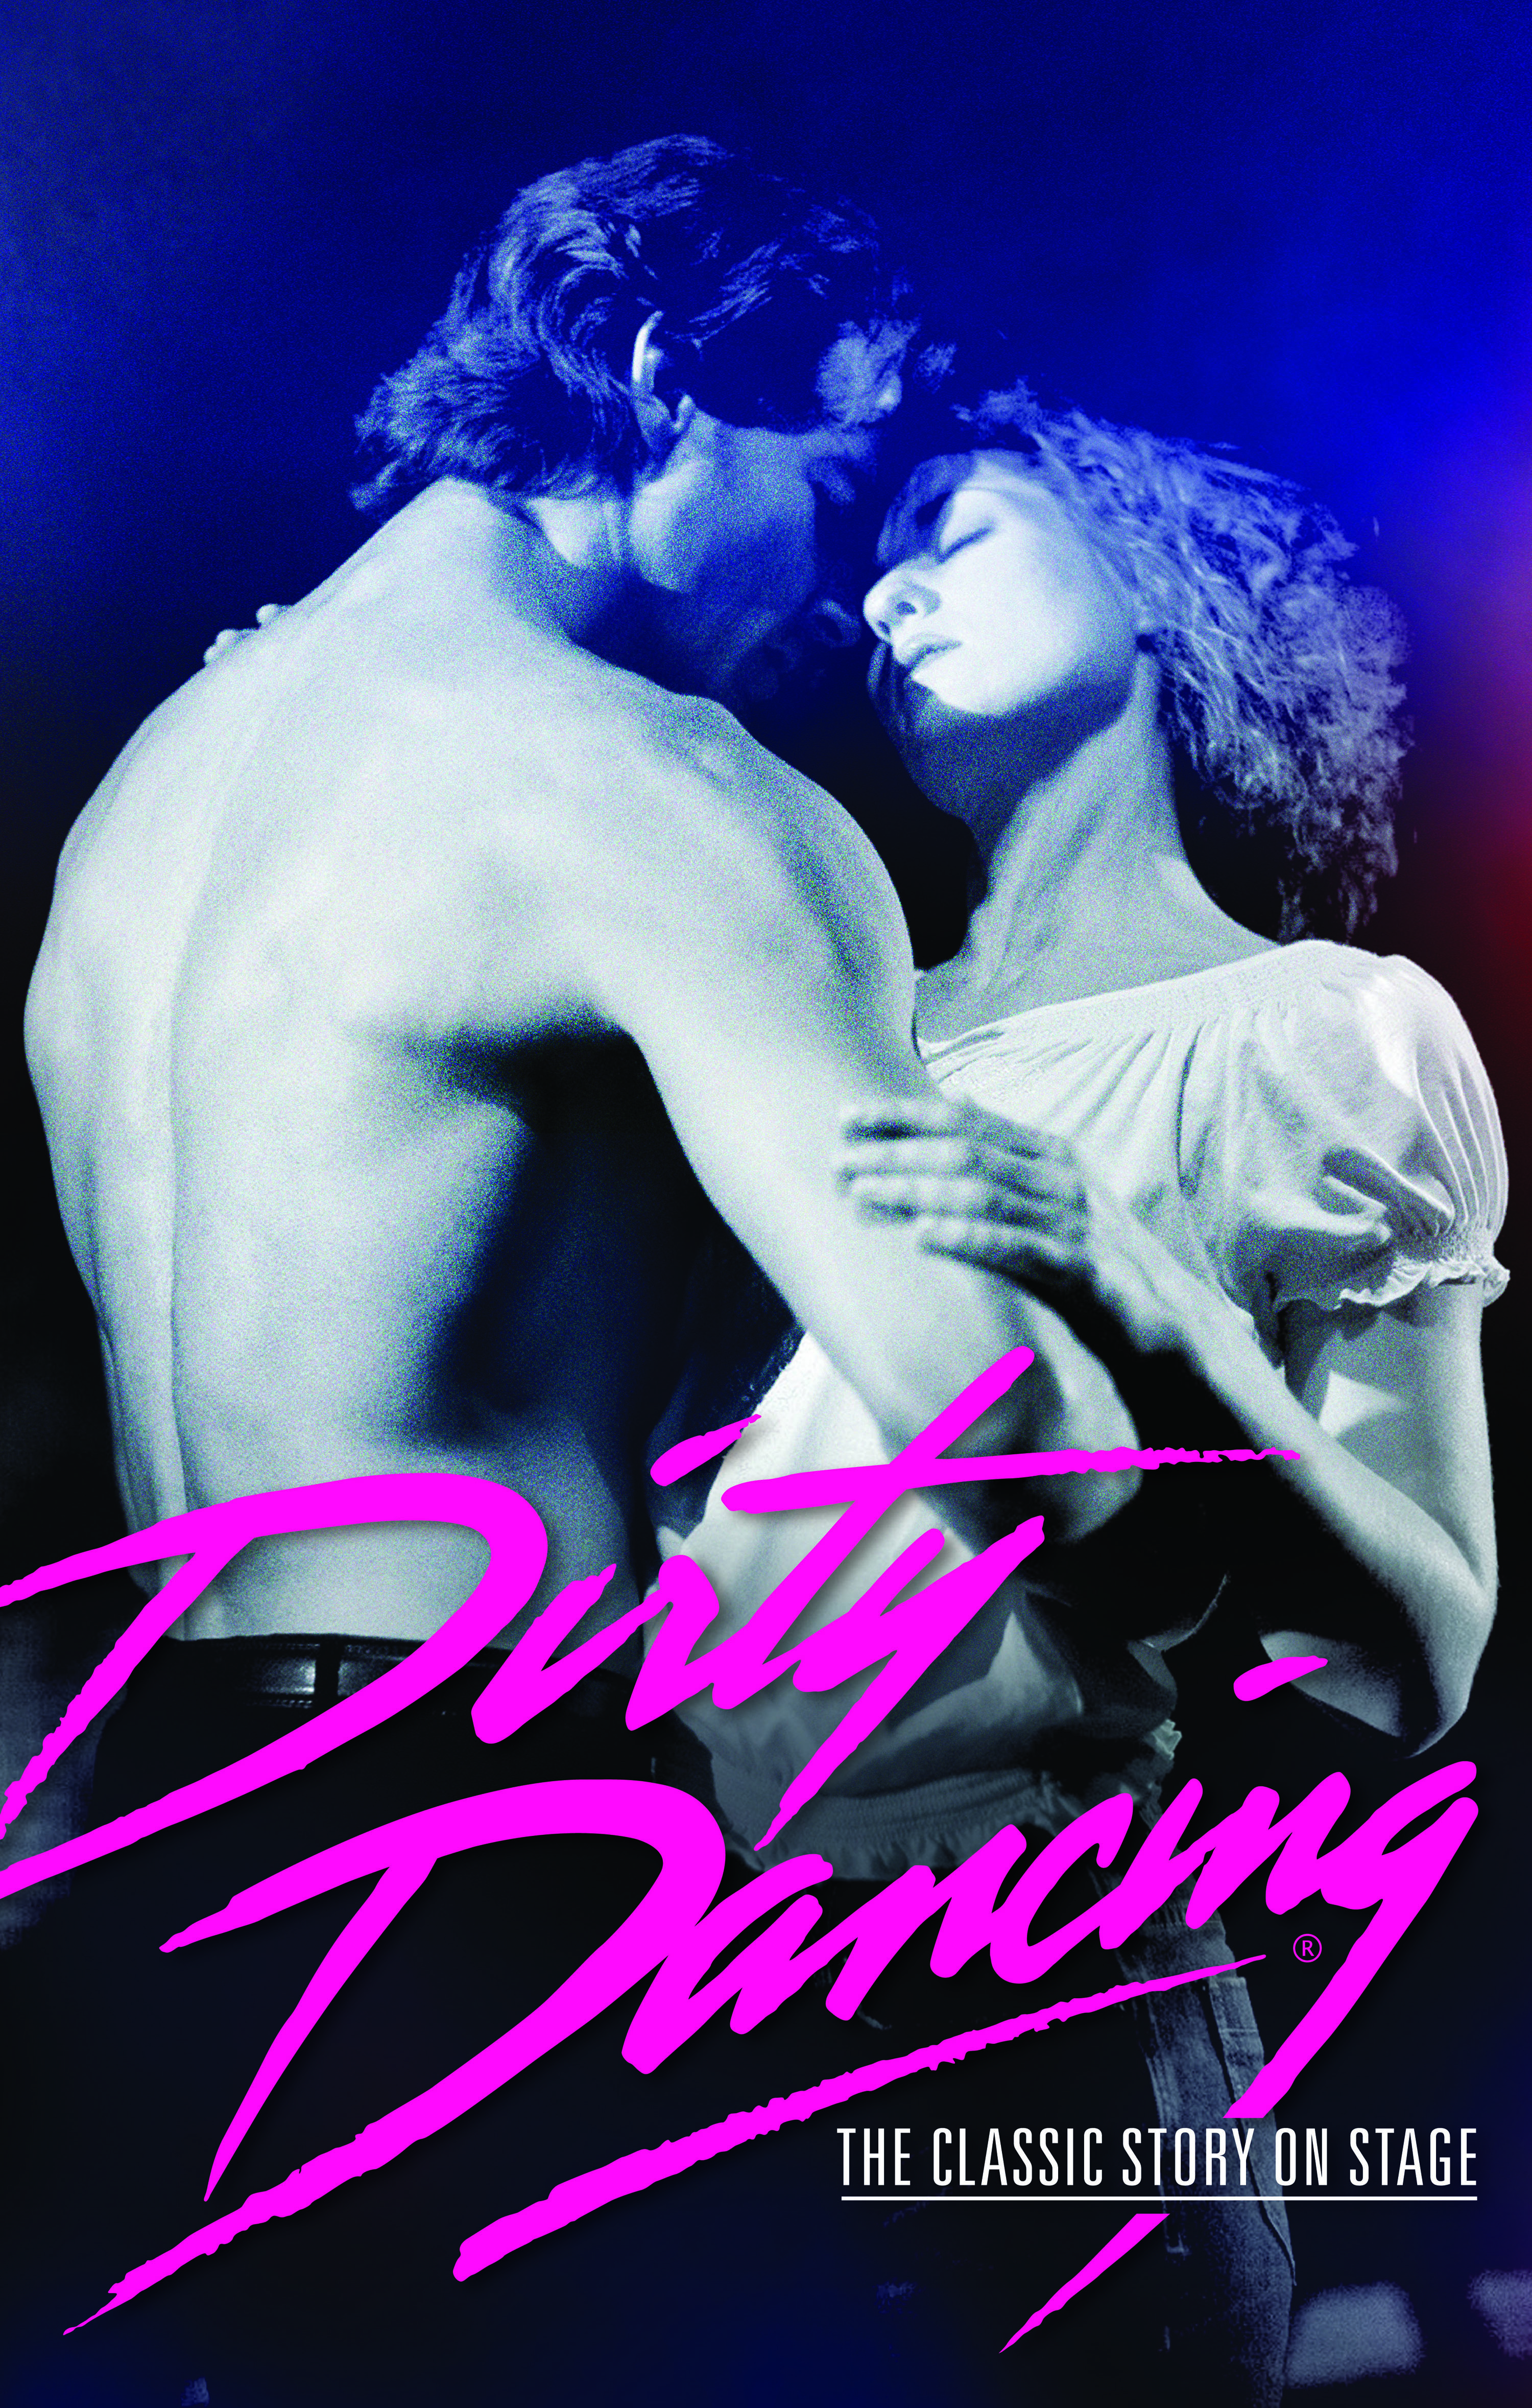 MD Hippodrome Dirty Dancing promo pic